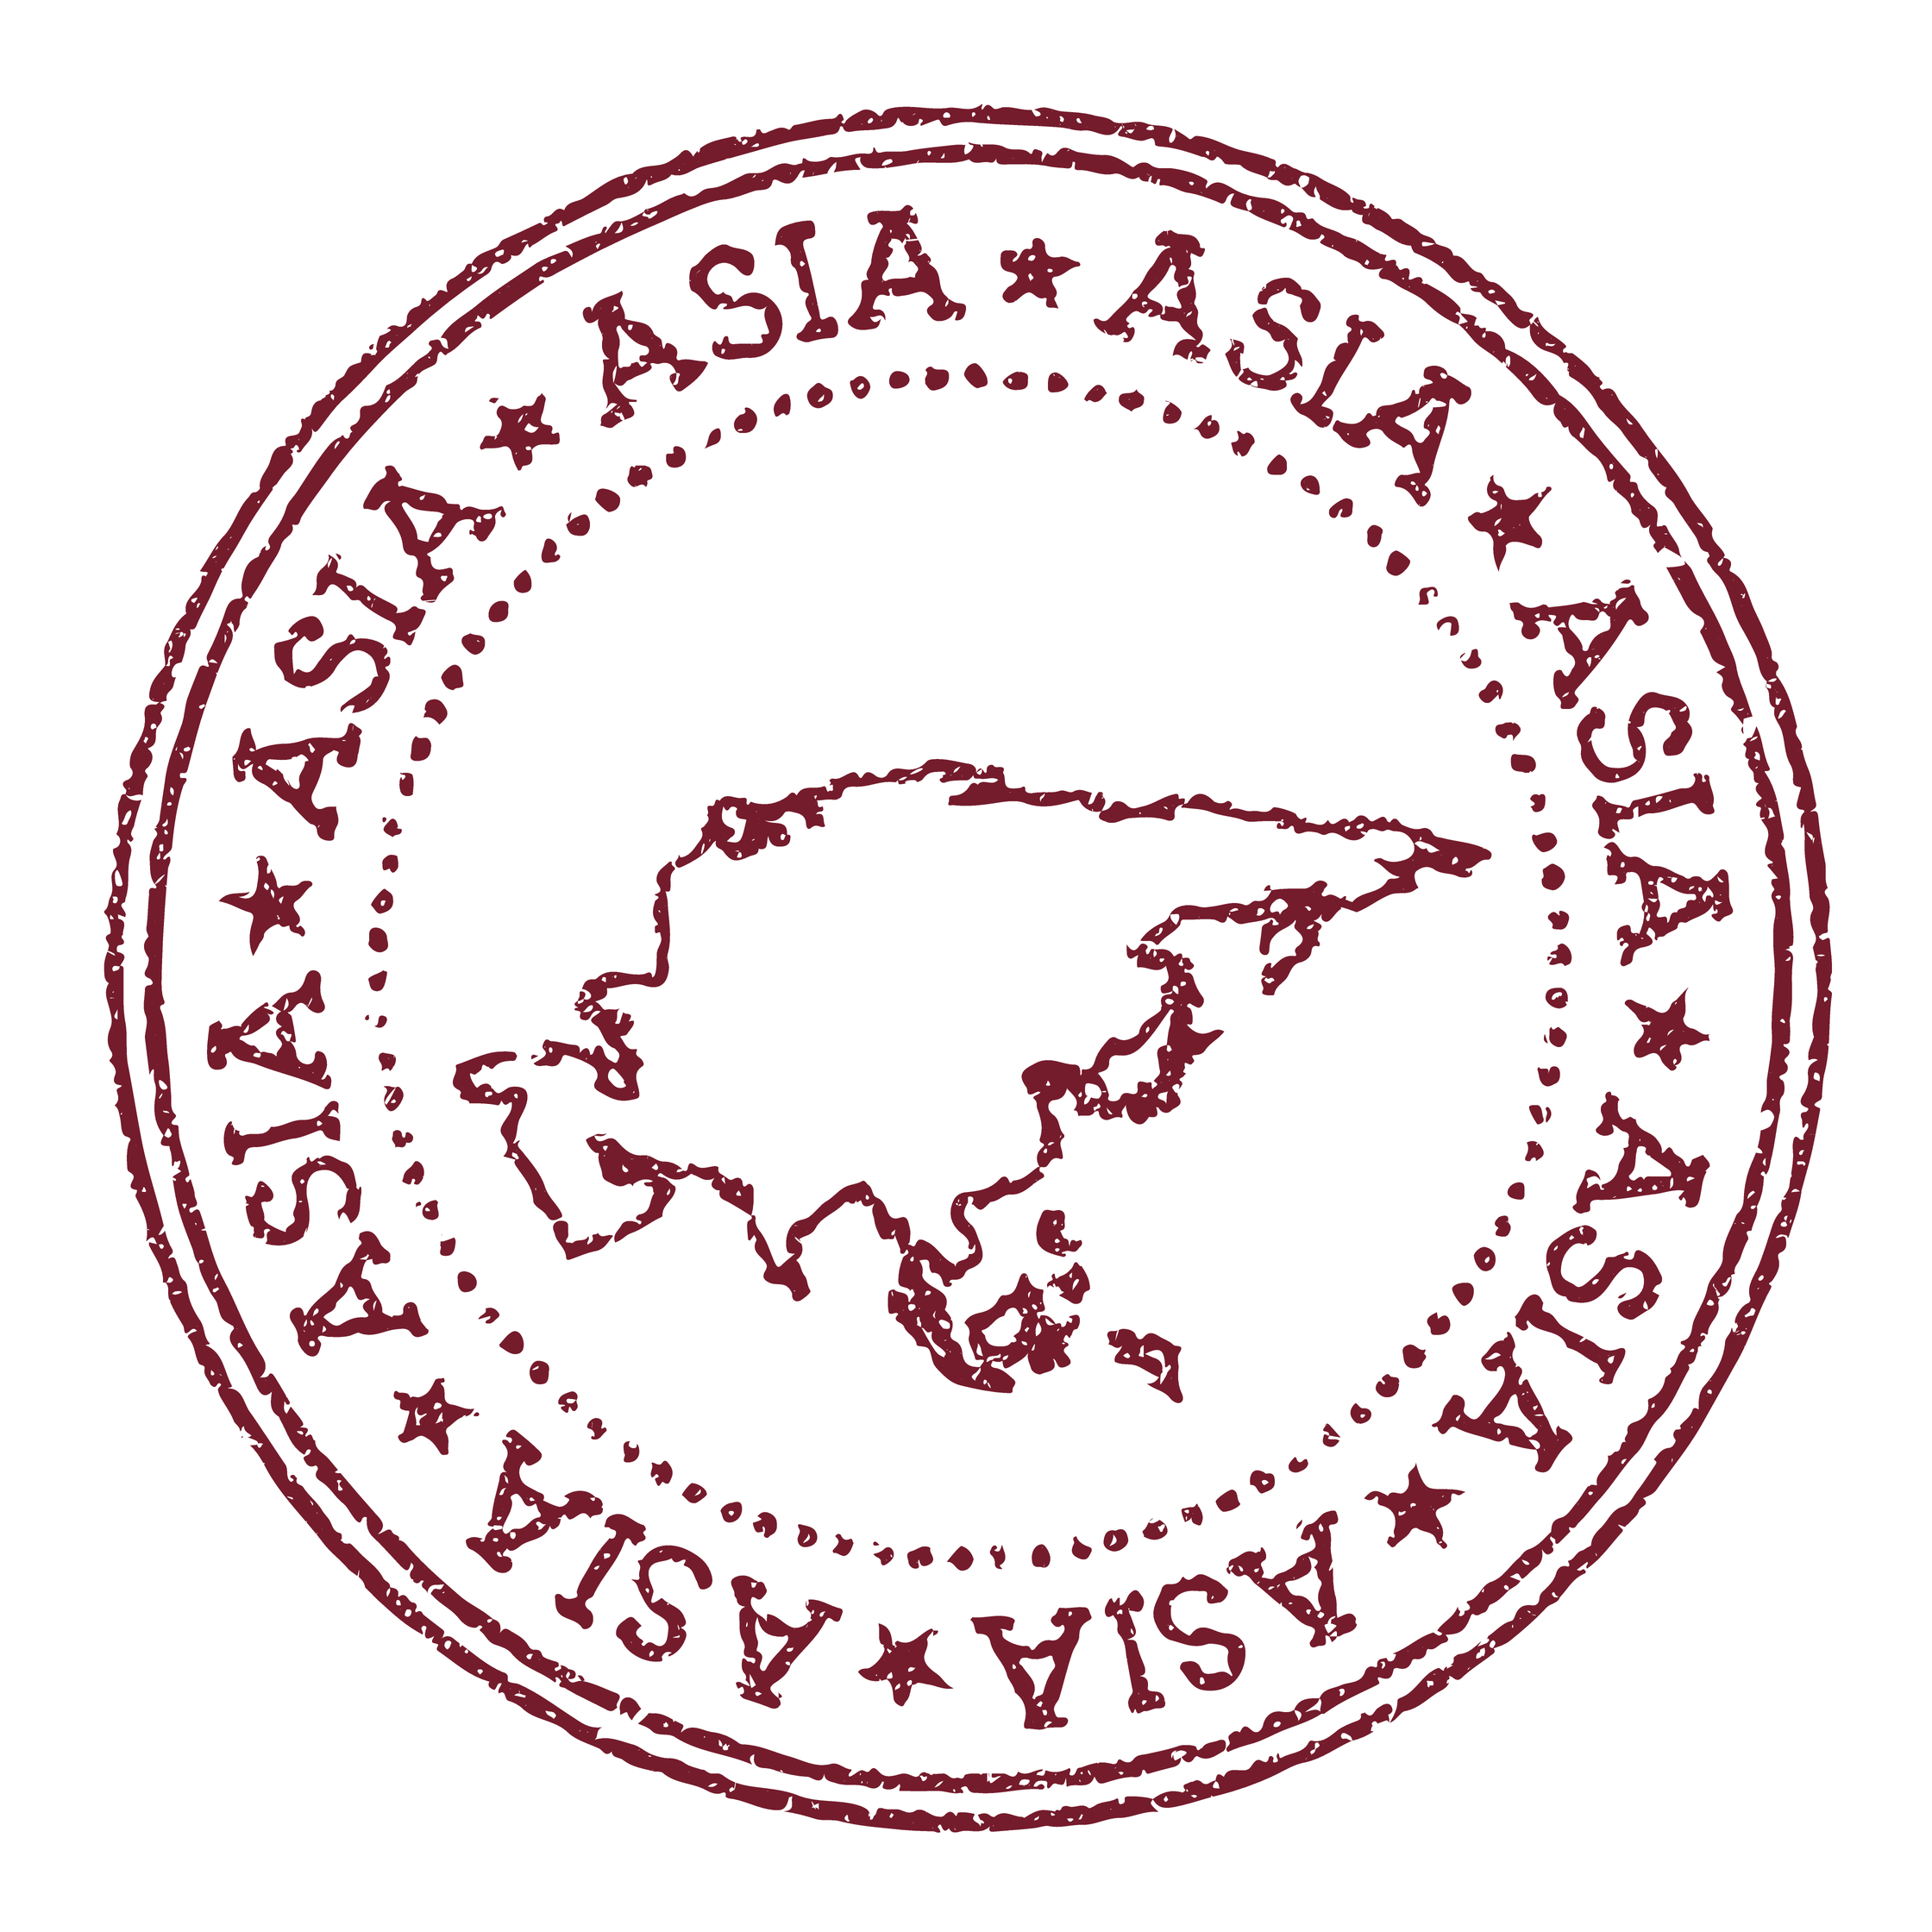 Destinations Round Rubber Postage Stamp, with an outline of the continent in the centre, and the word Asia written around the edge of the circle.